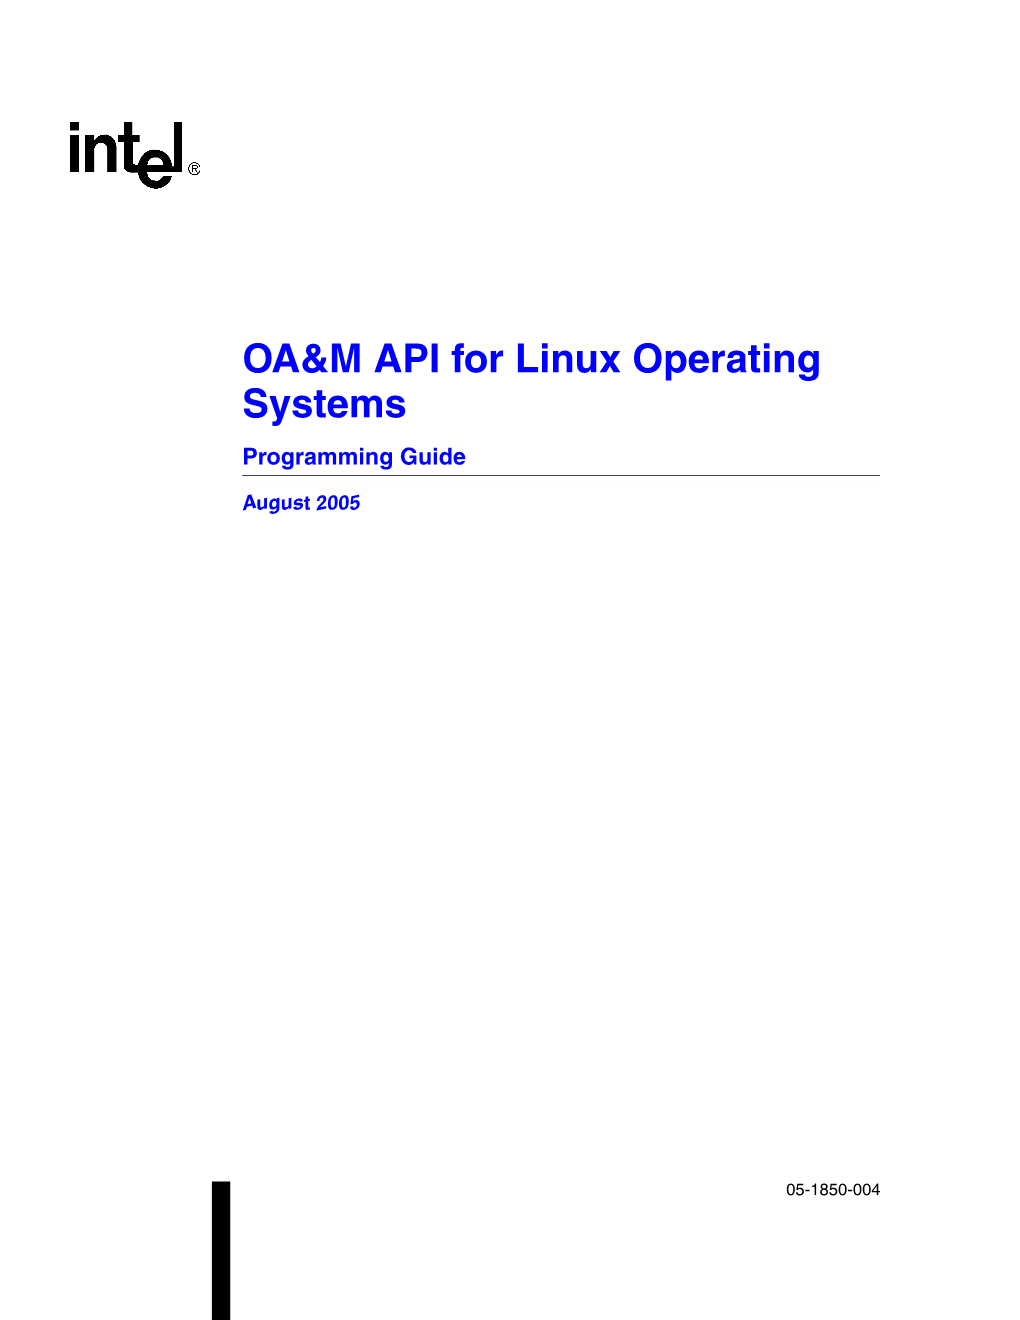 OA&M API for Linux Operating Systems Programming Guide